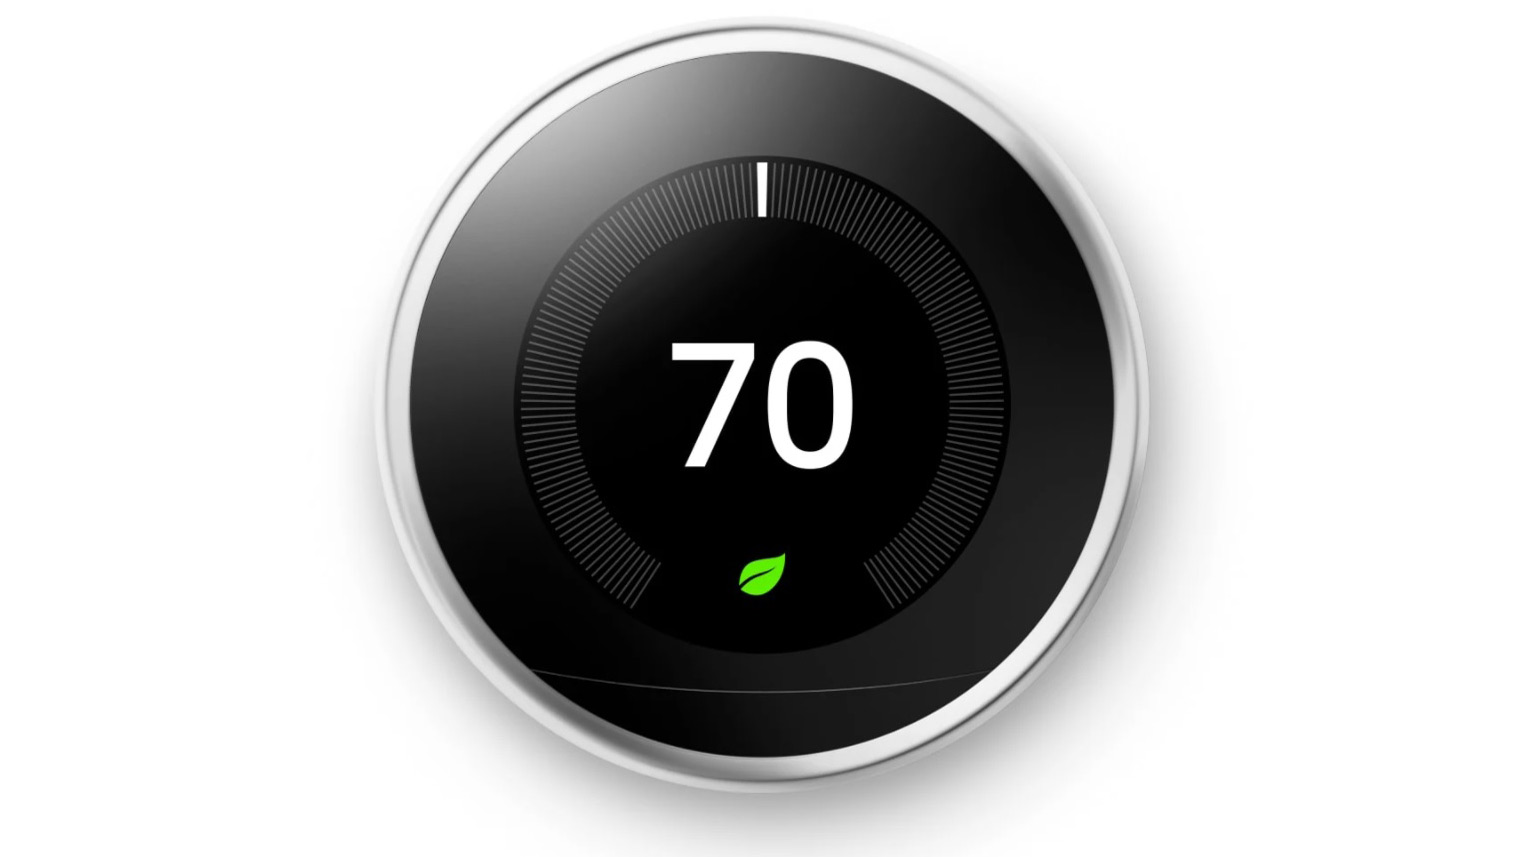 Google Nest Larning Thermostat, our best smart thermostat, on a white background